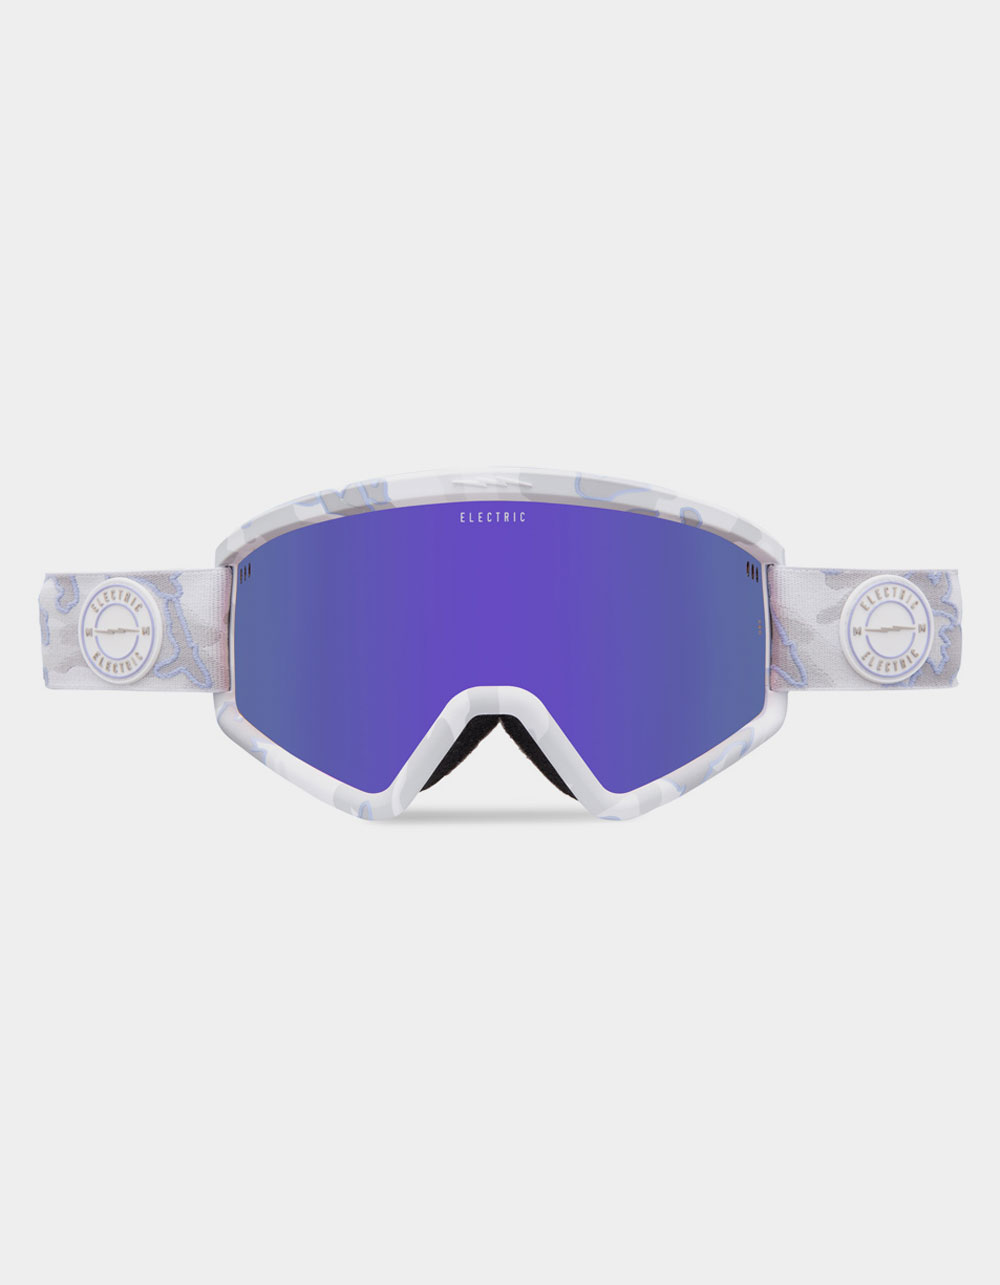 ELECTRIC Hex Snow Goggles